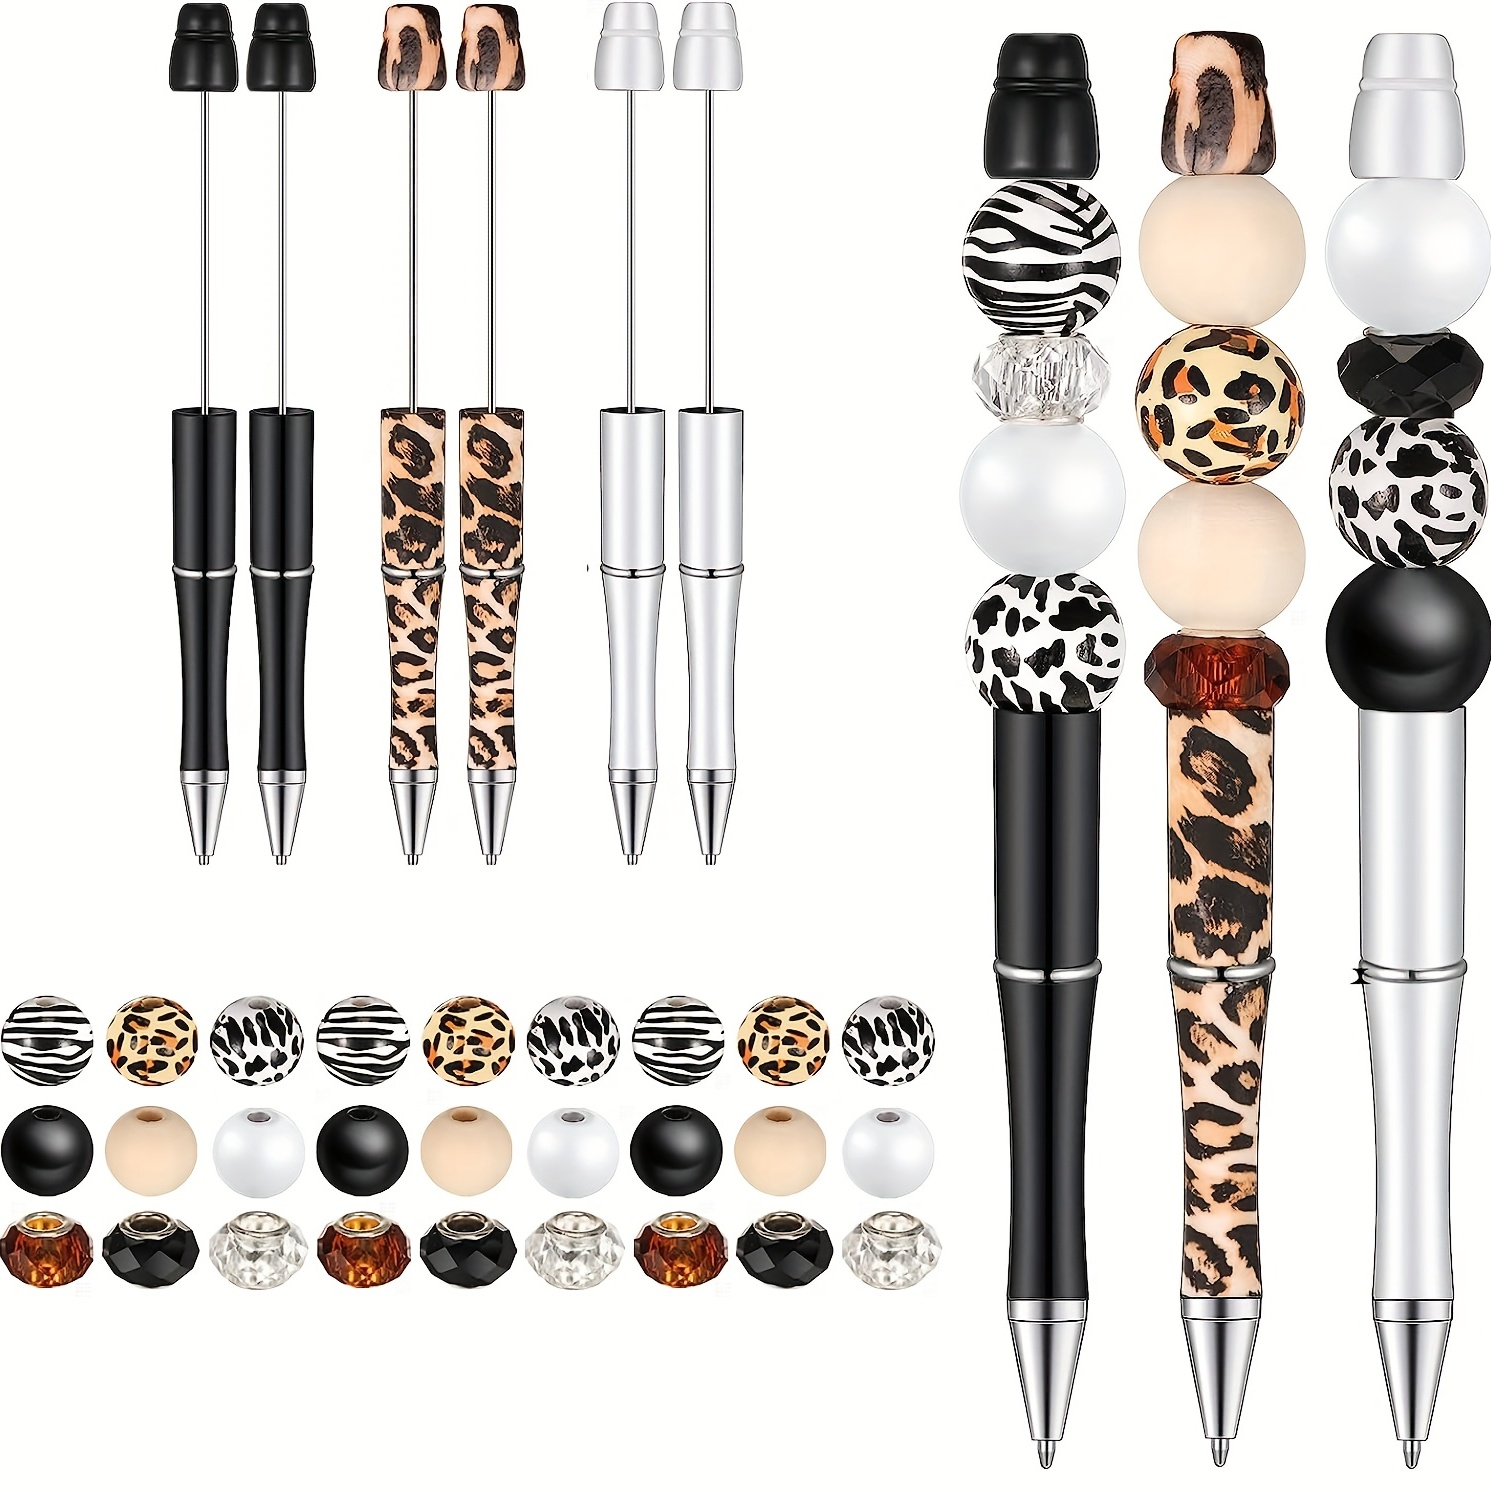 Cow Printed Beaded Pens, Cow Pens, Silicone Beads, Cute Beaded Pens, Cow  Print Beads, Animal Pen, Beaded Pen, Silicone Beaded Pens 